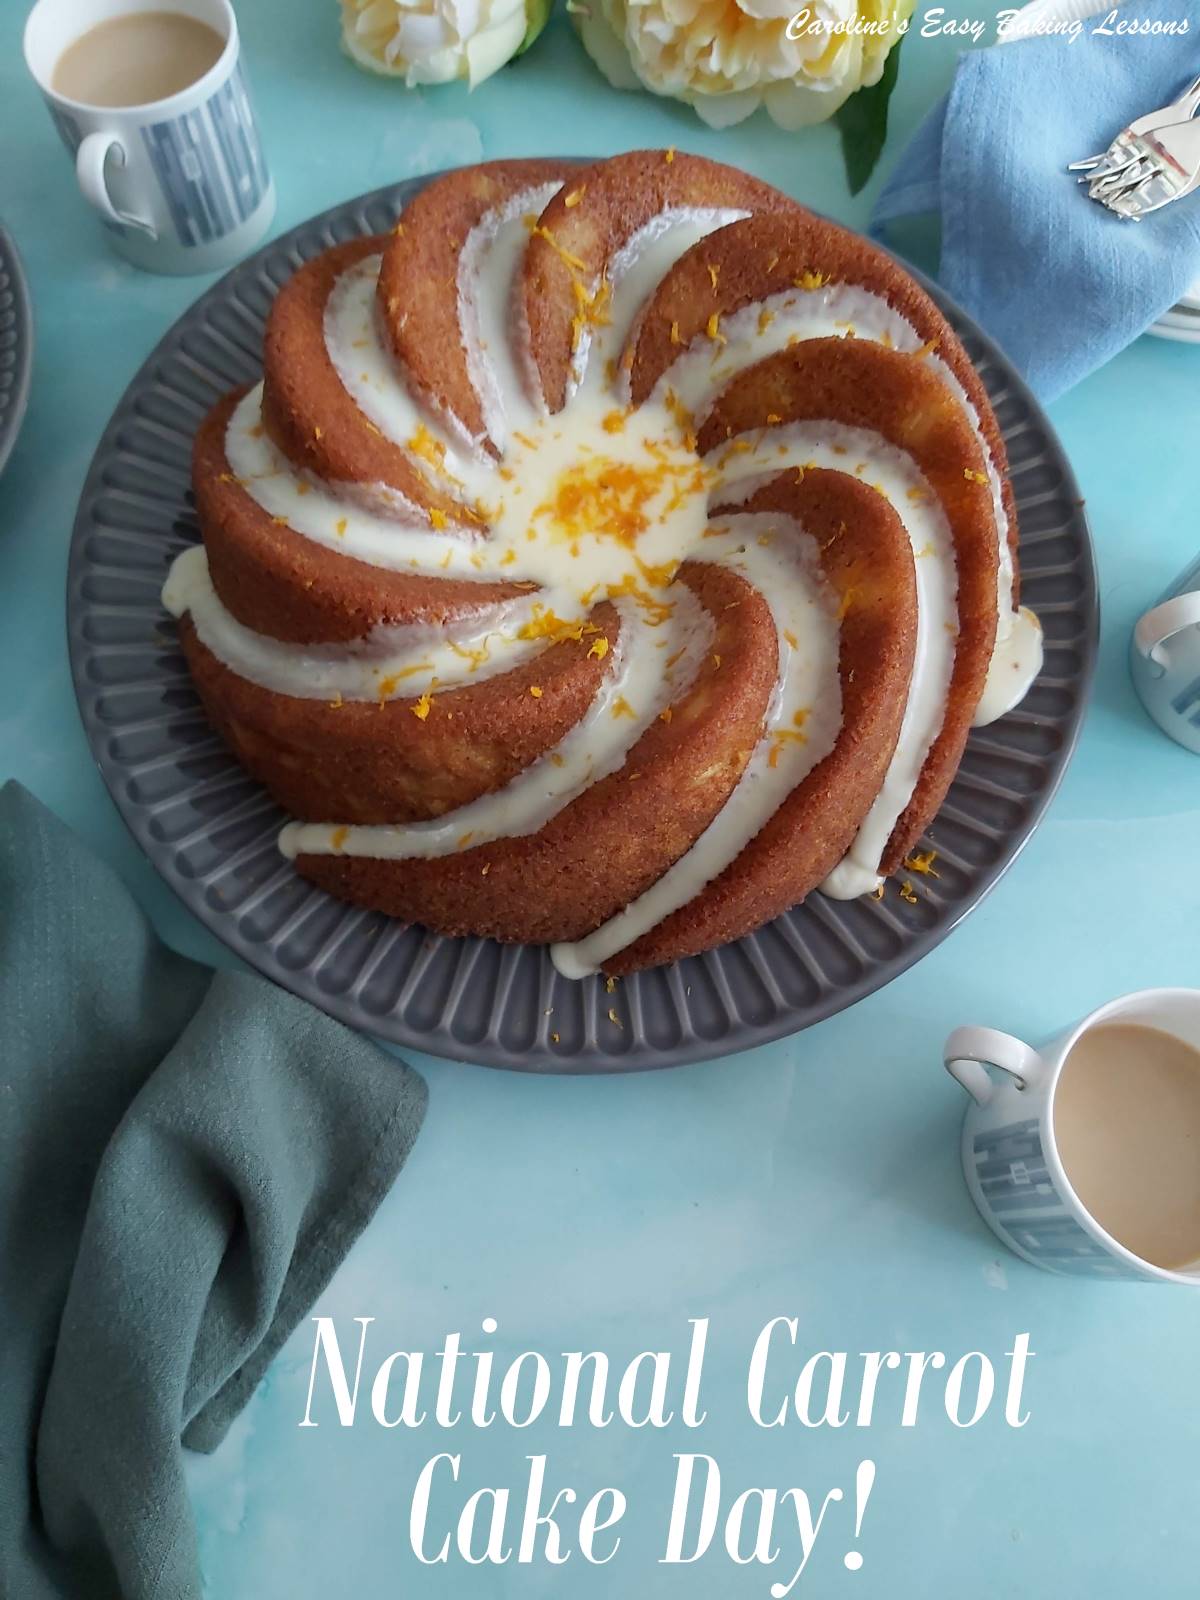 Bundt style carrot cake with drizzled frosting and orange zest, on a dark grey plate on top of a pale blue background, with green napkin, small coffee cups and forks, labelled national carrot cake day.